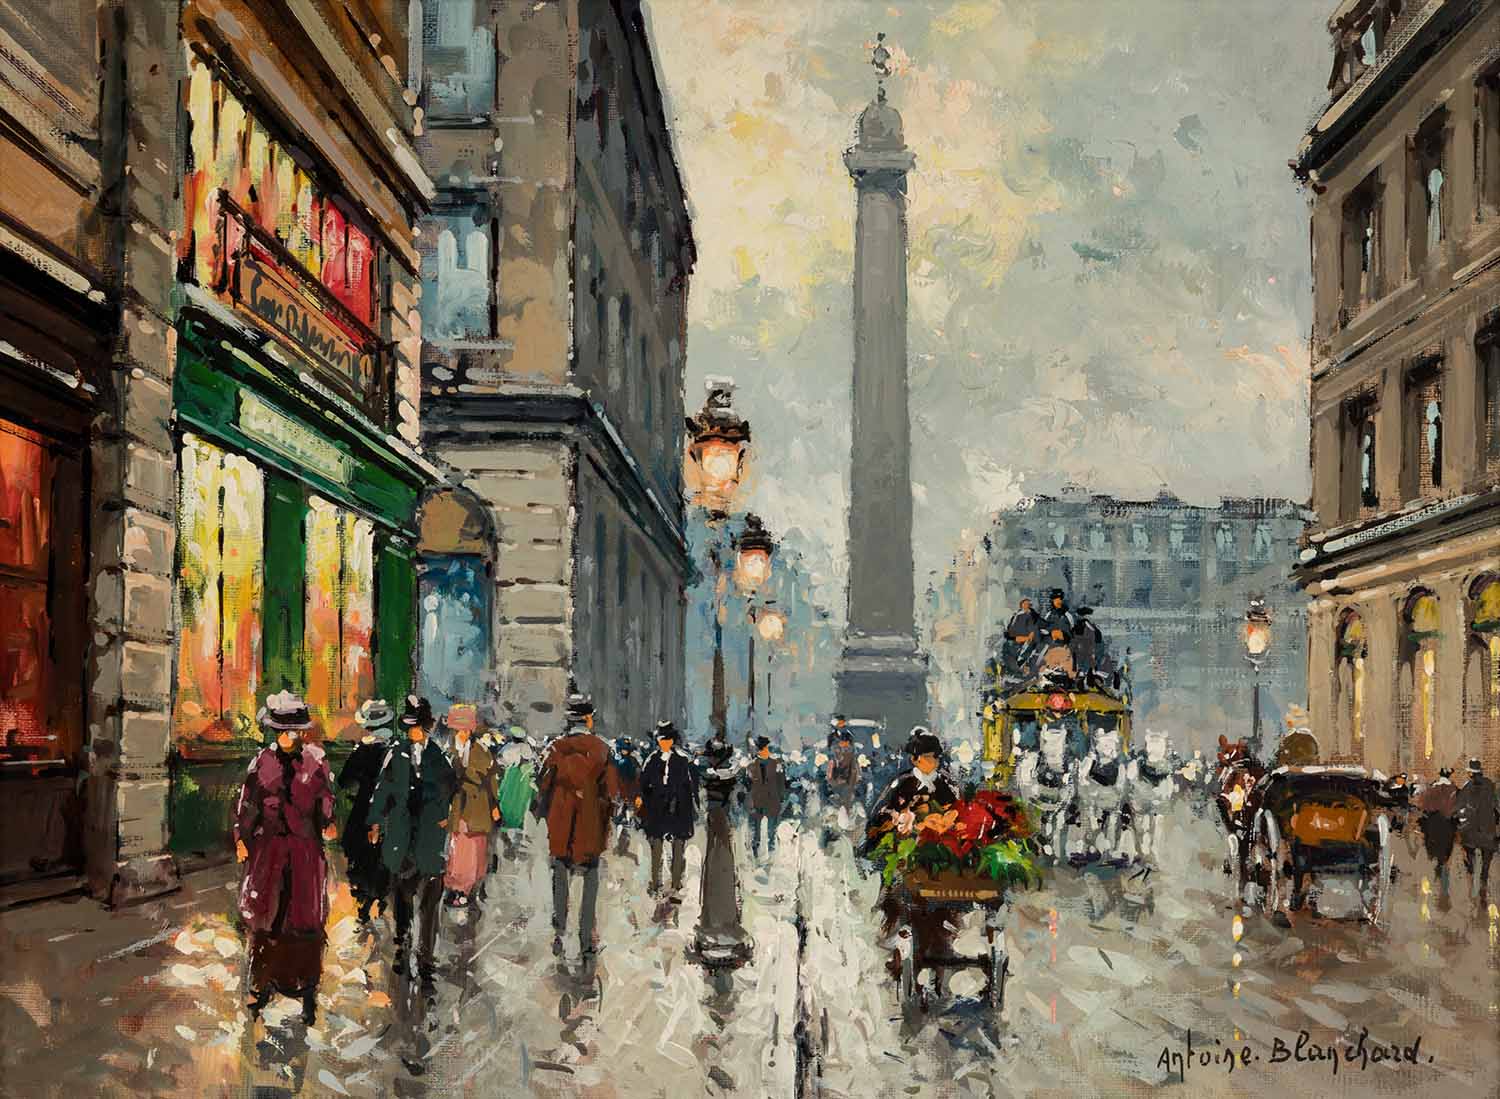 place vendome in paris with people walking on the street and a flower cart